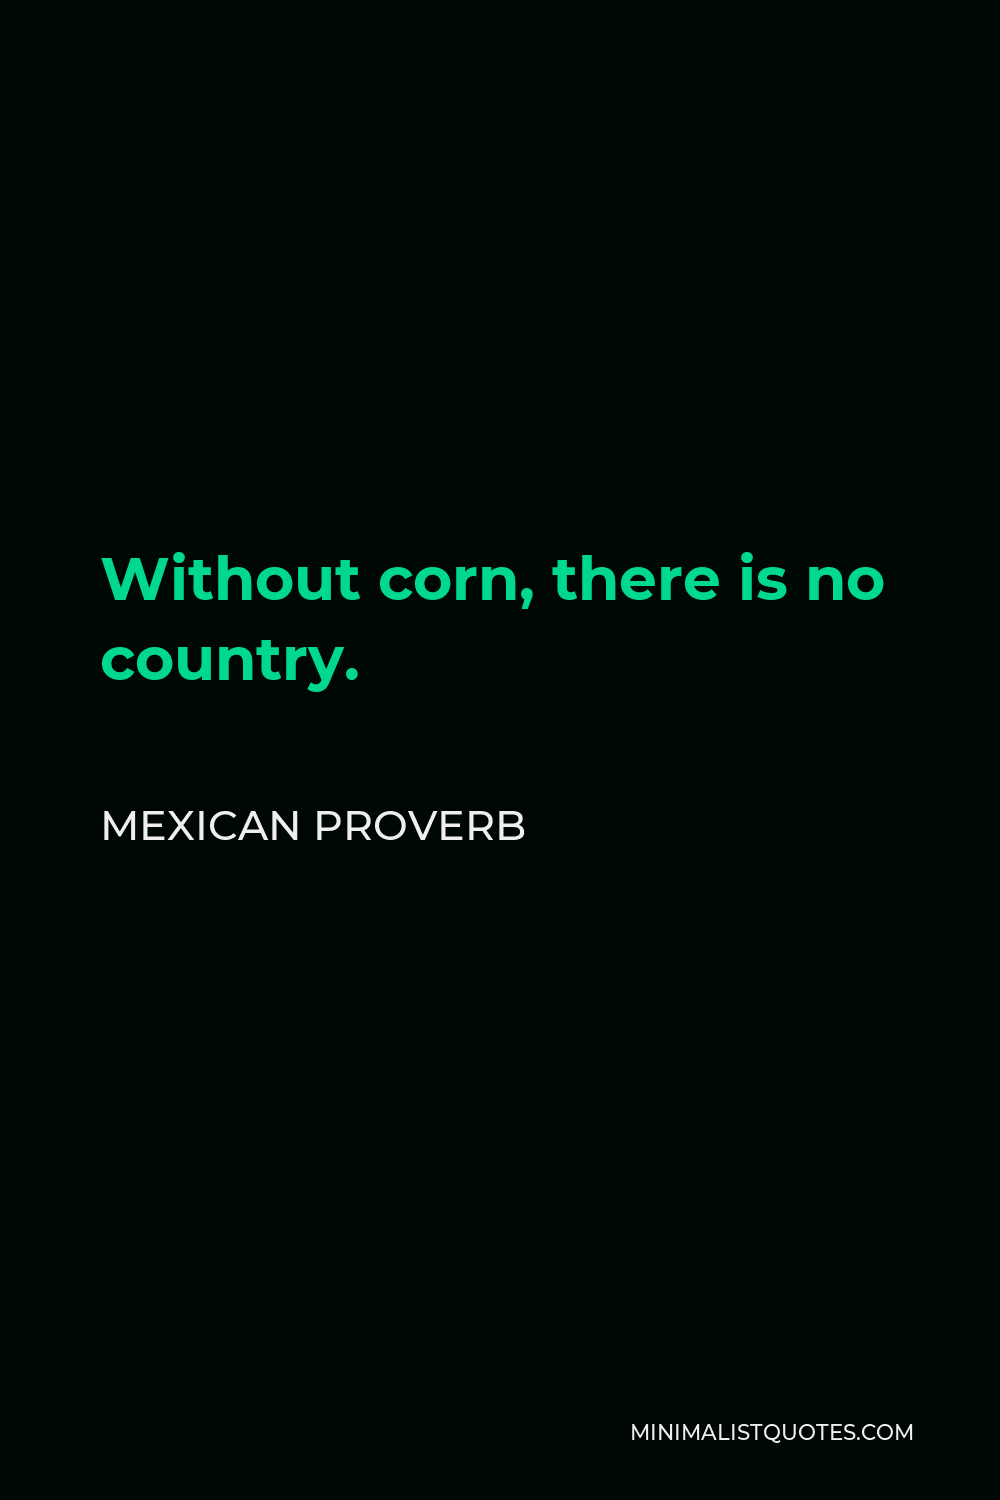 Mexican Proverb Quote - Without corn, there is no country.